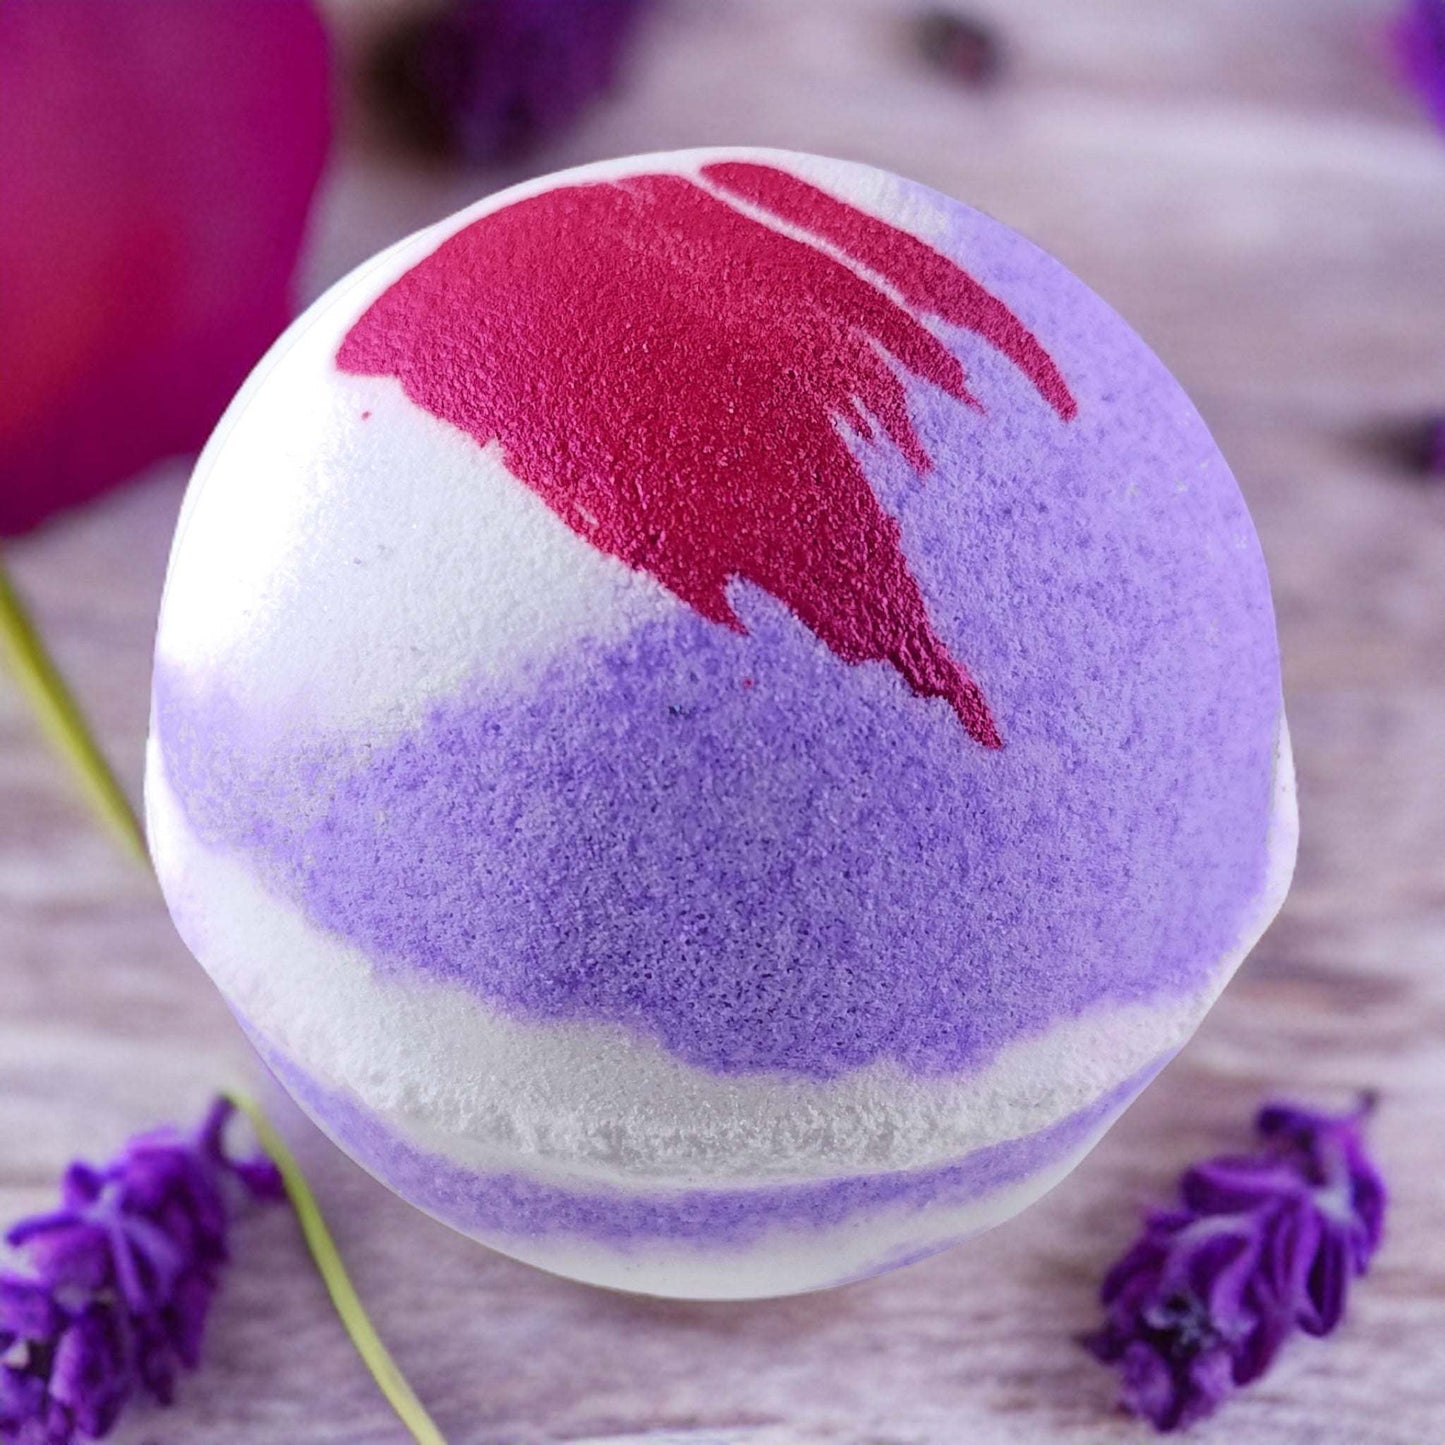 Indulge in a lavish bath experience with our Lavender Luxury Fizzy Bath Bomb. Get yours now!